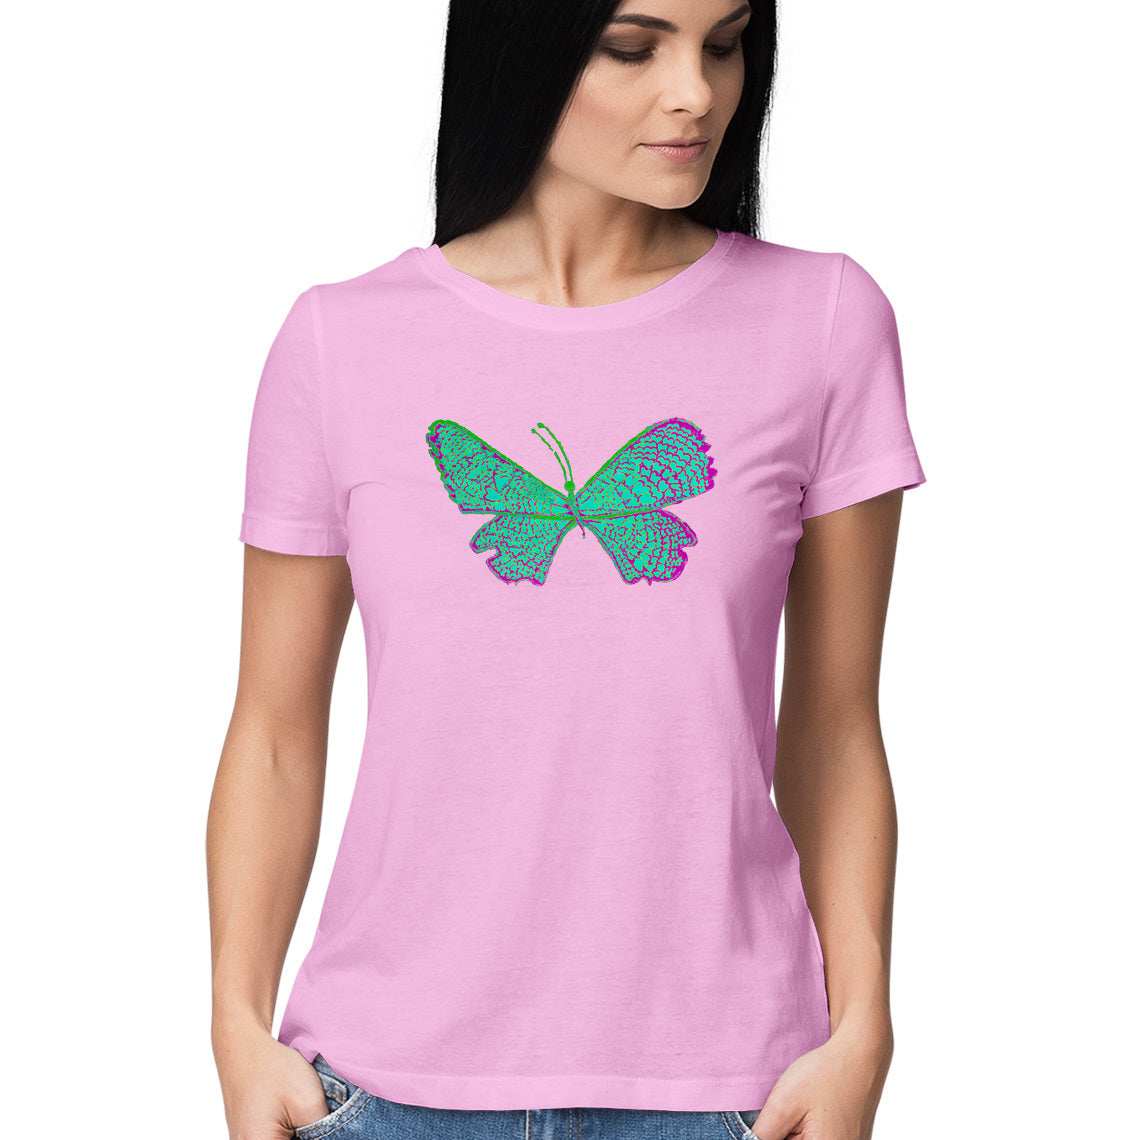 The Turquoise Butterfly Women's T-Shirt - CBD Store India